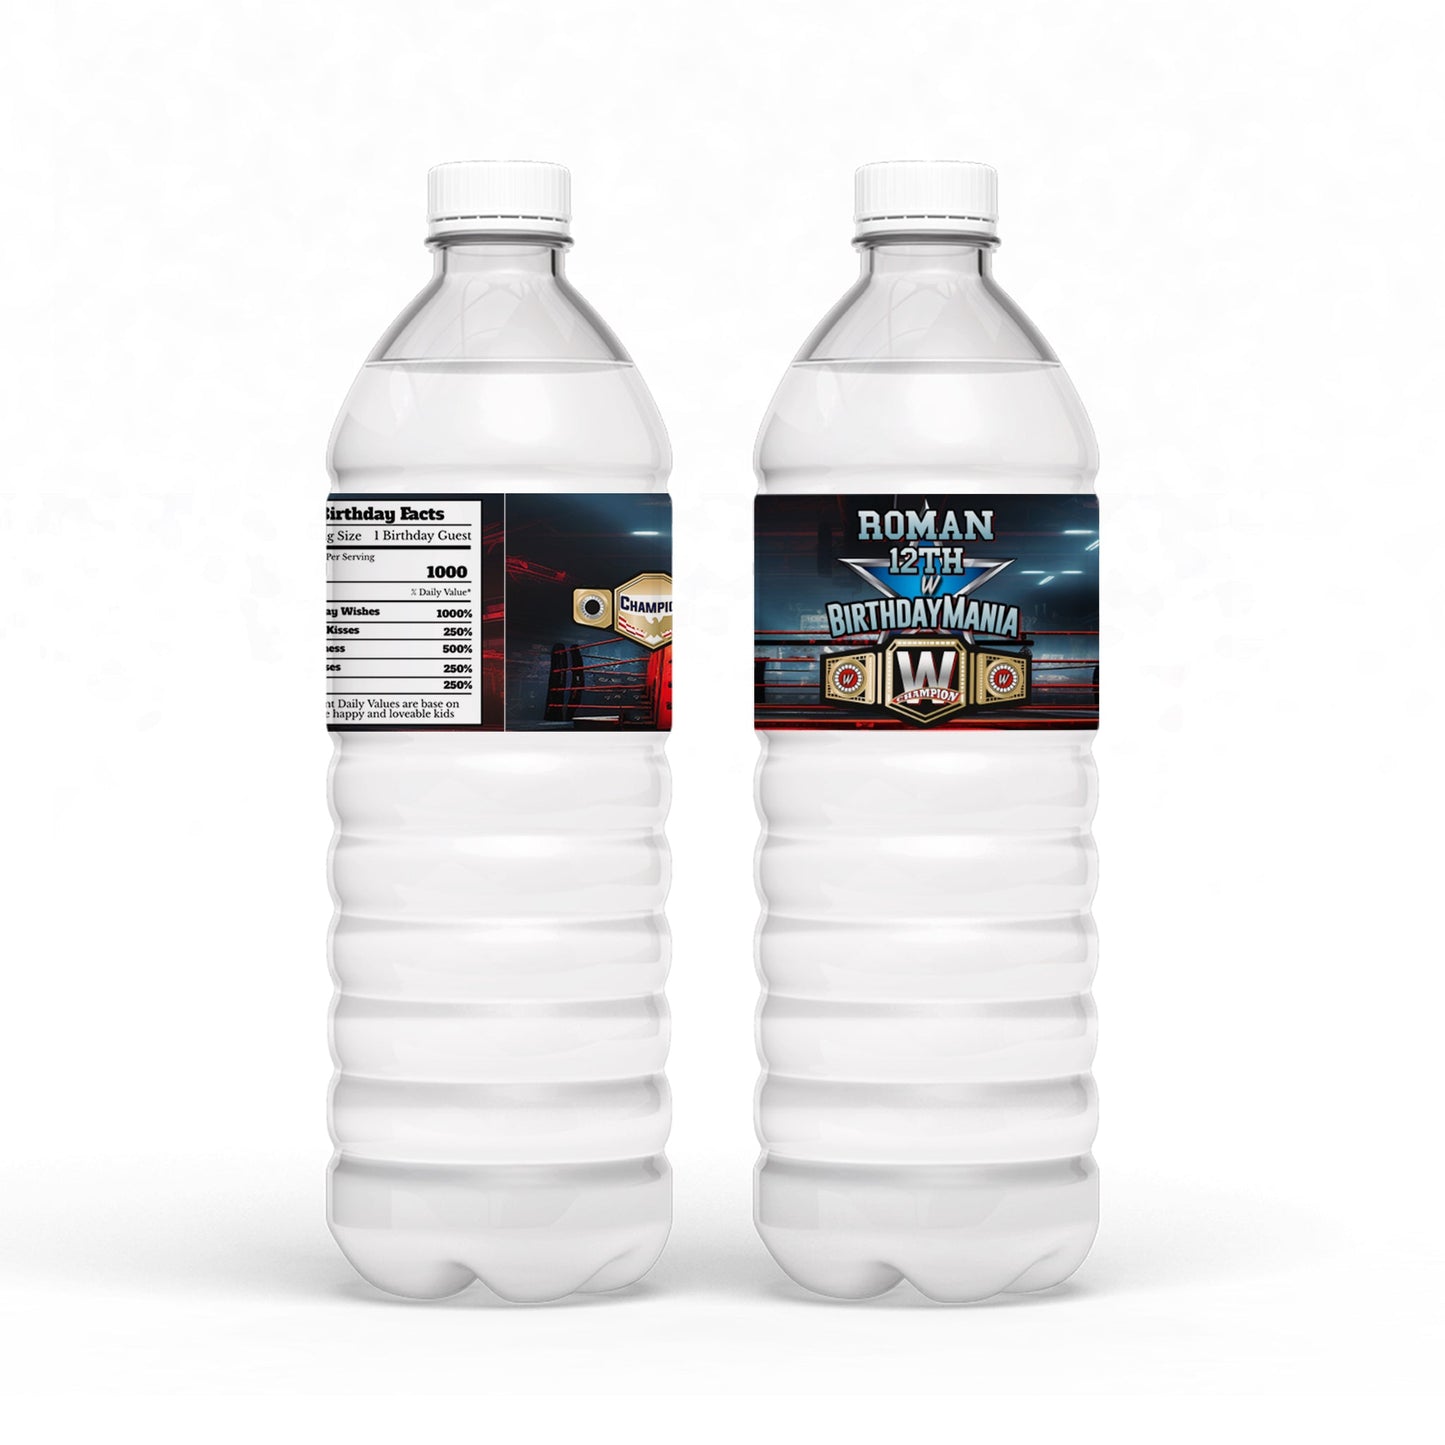 Customizable WWE water bottle label with wrestling icons